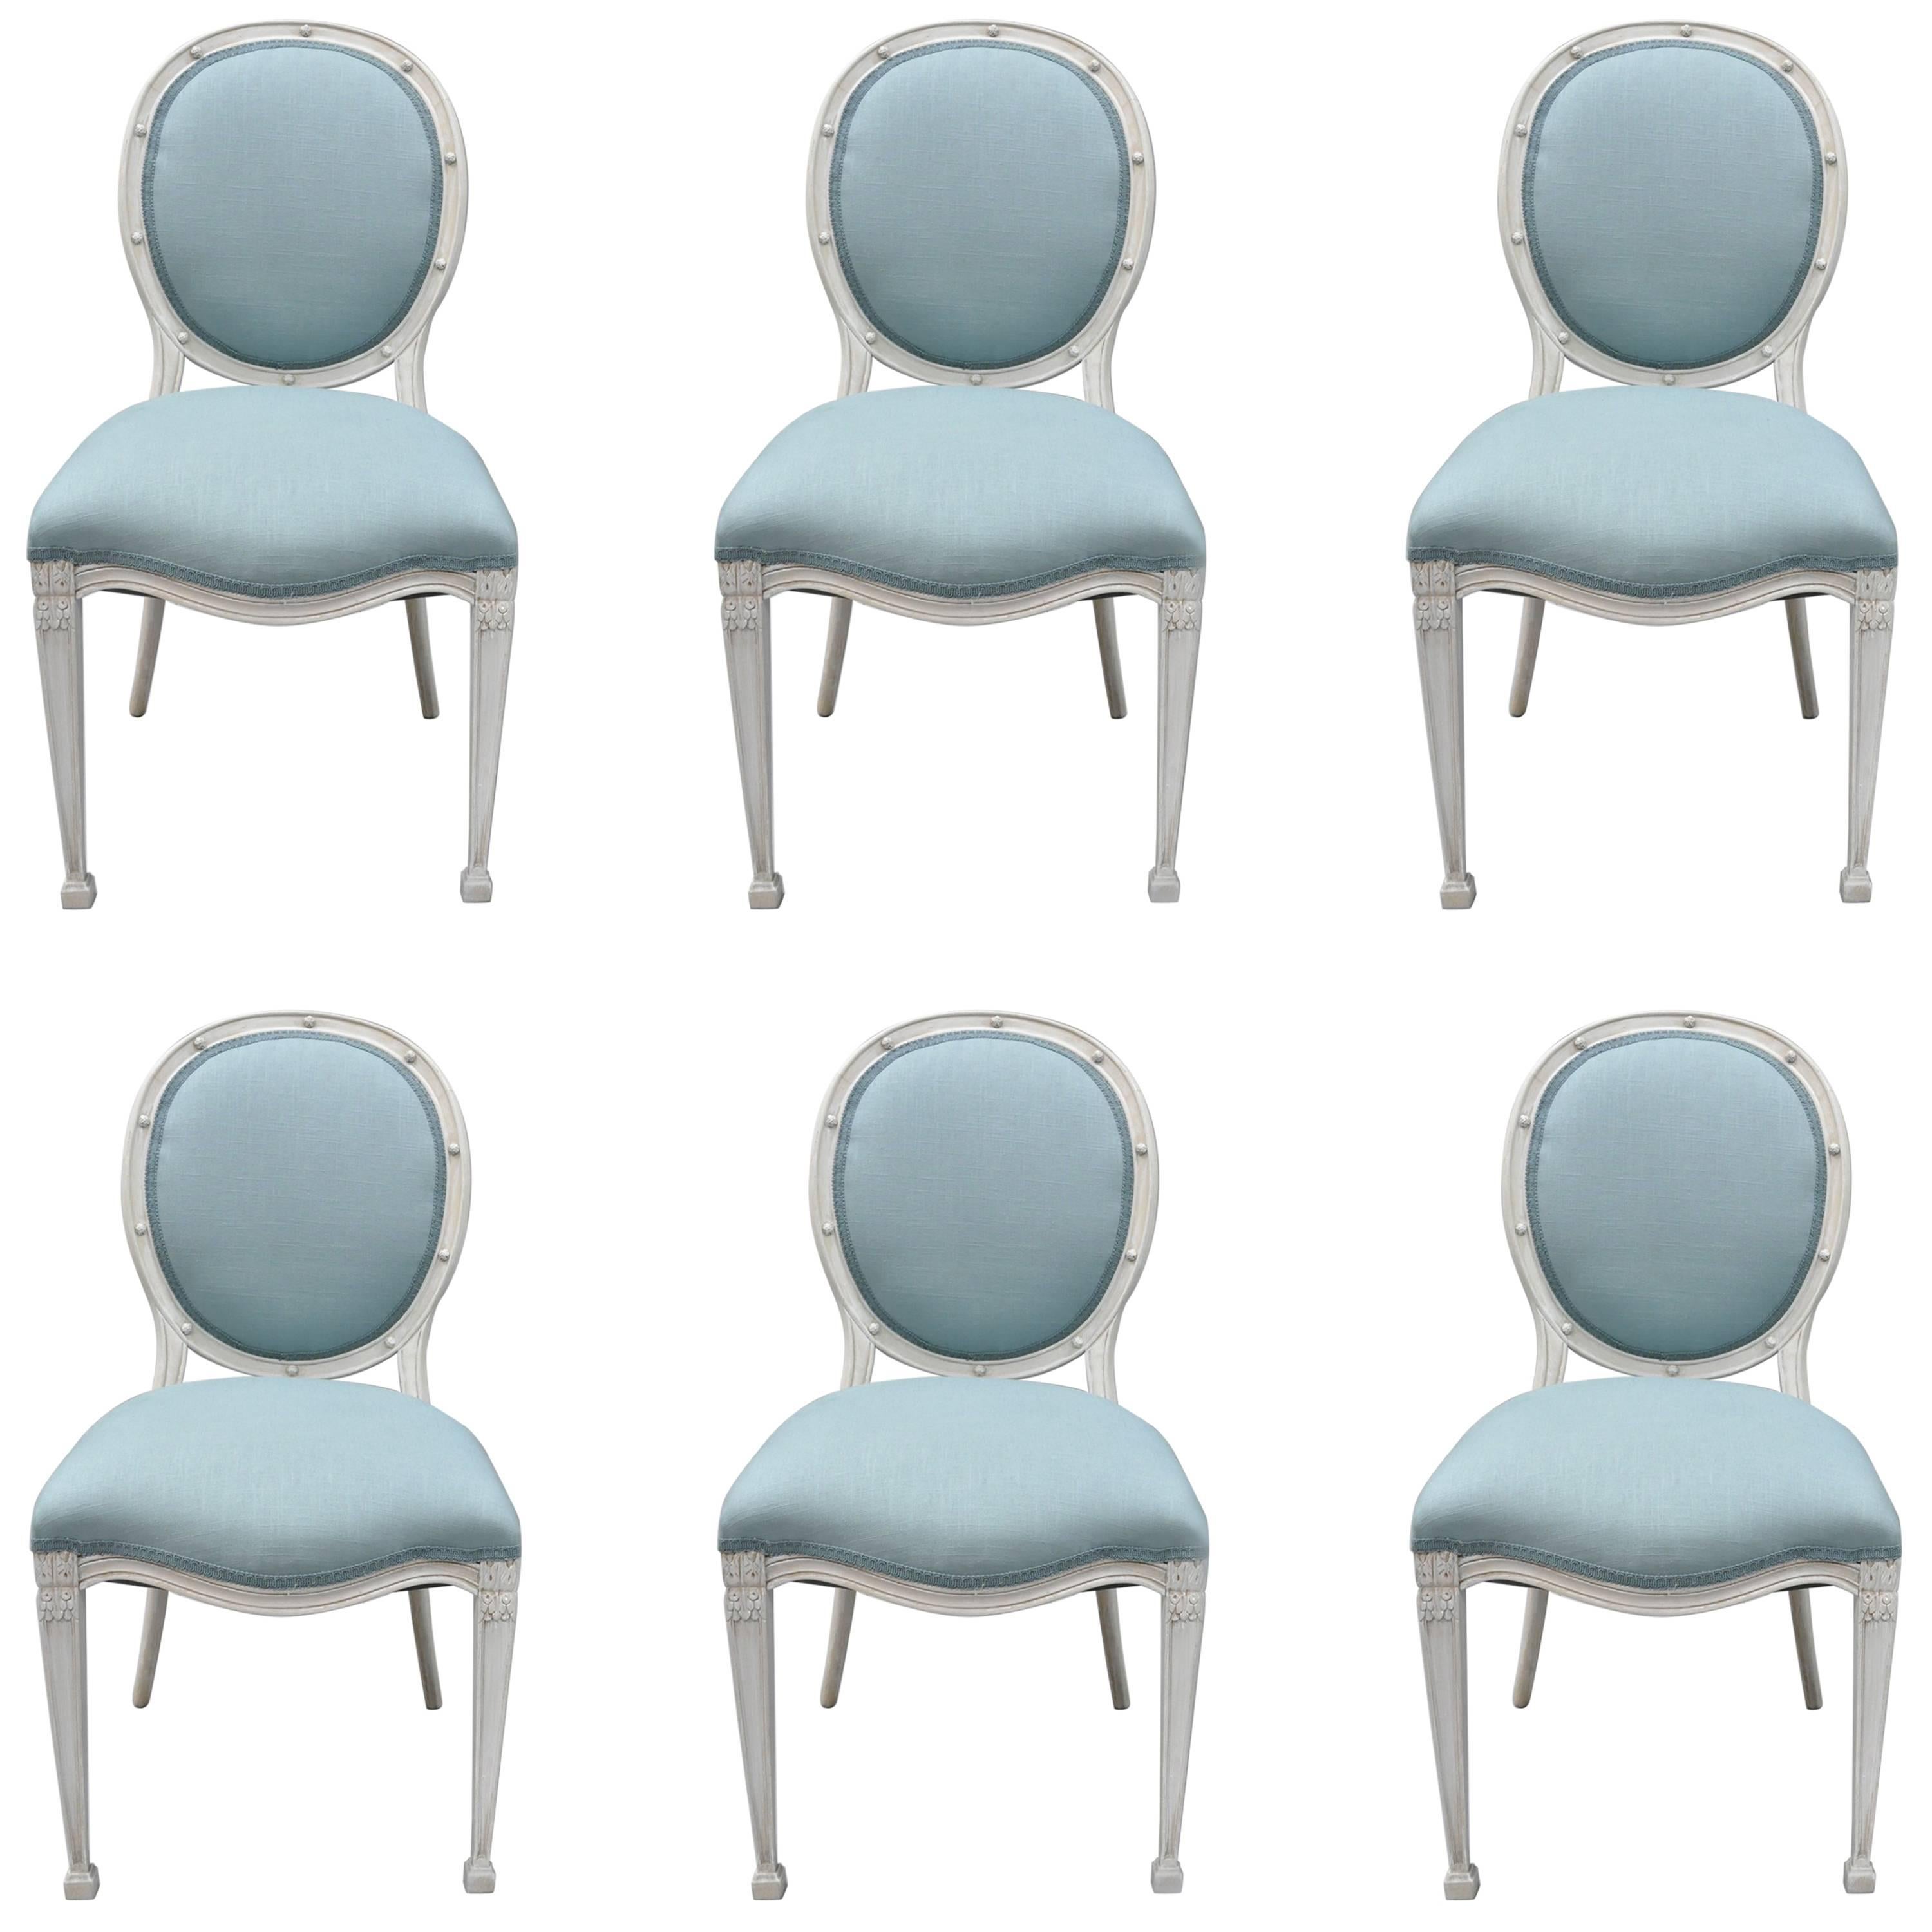 French Regency Neoclassical Style Dining Chairs, Set of Six